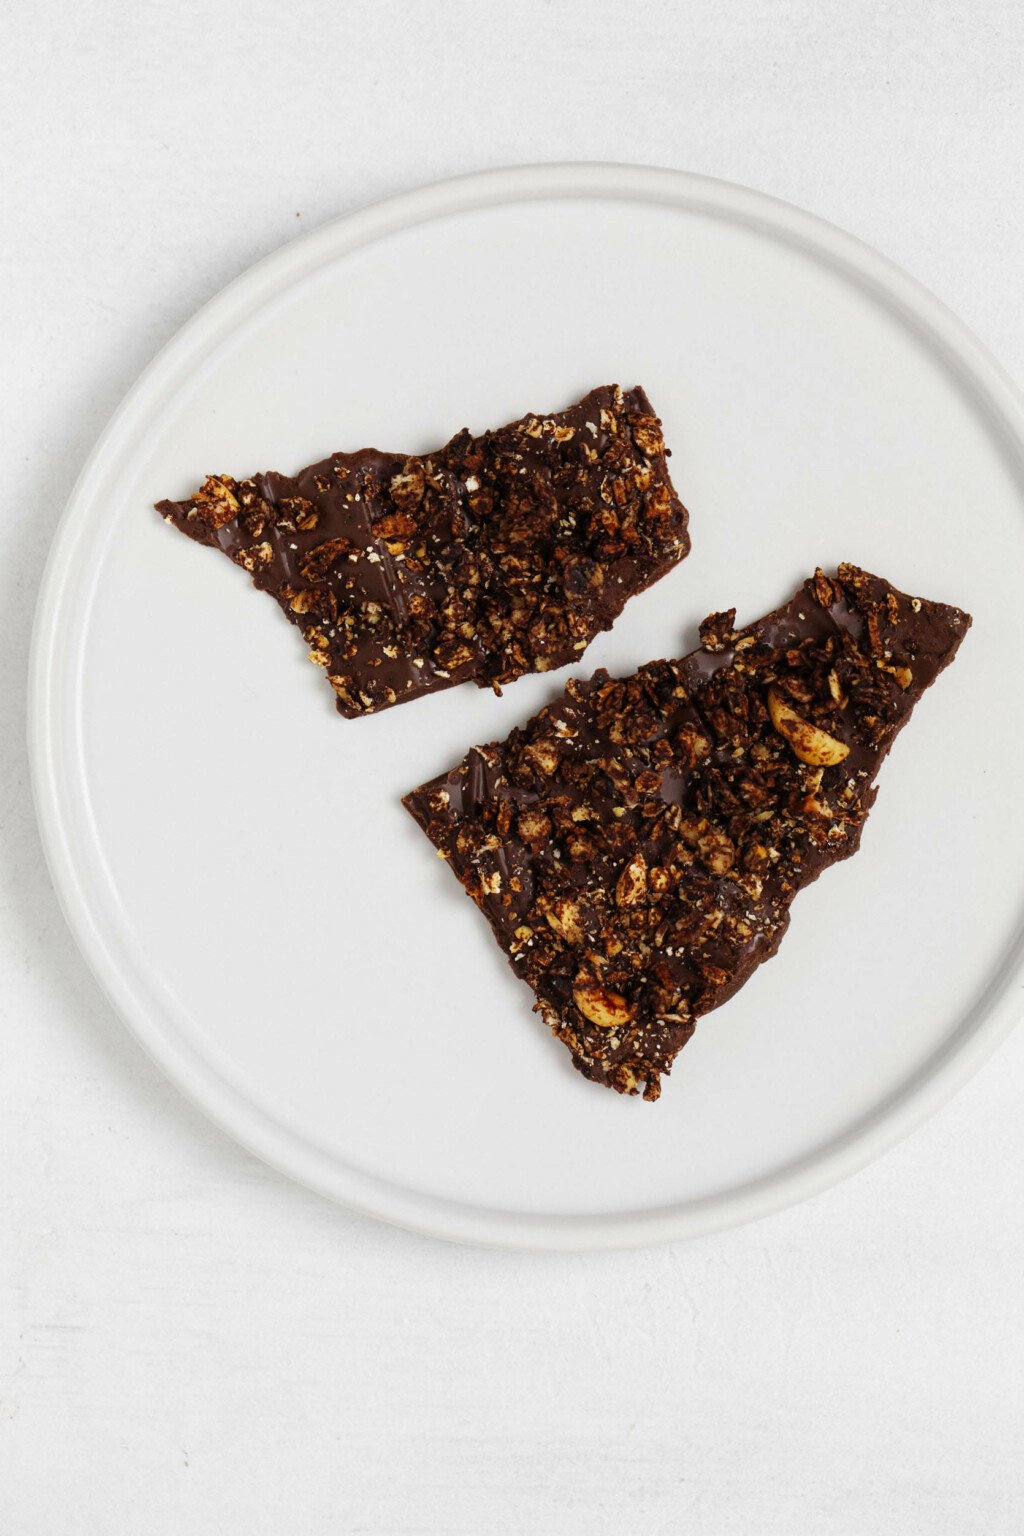 Two pieces of vegan granola dark chocolate bark have been broken and placed on a small, round white plate.